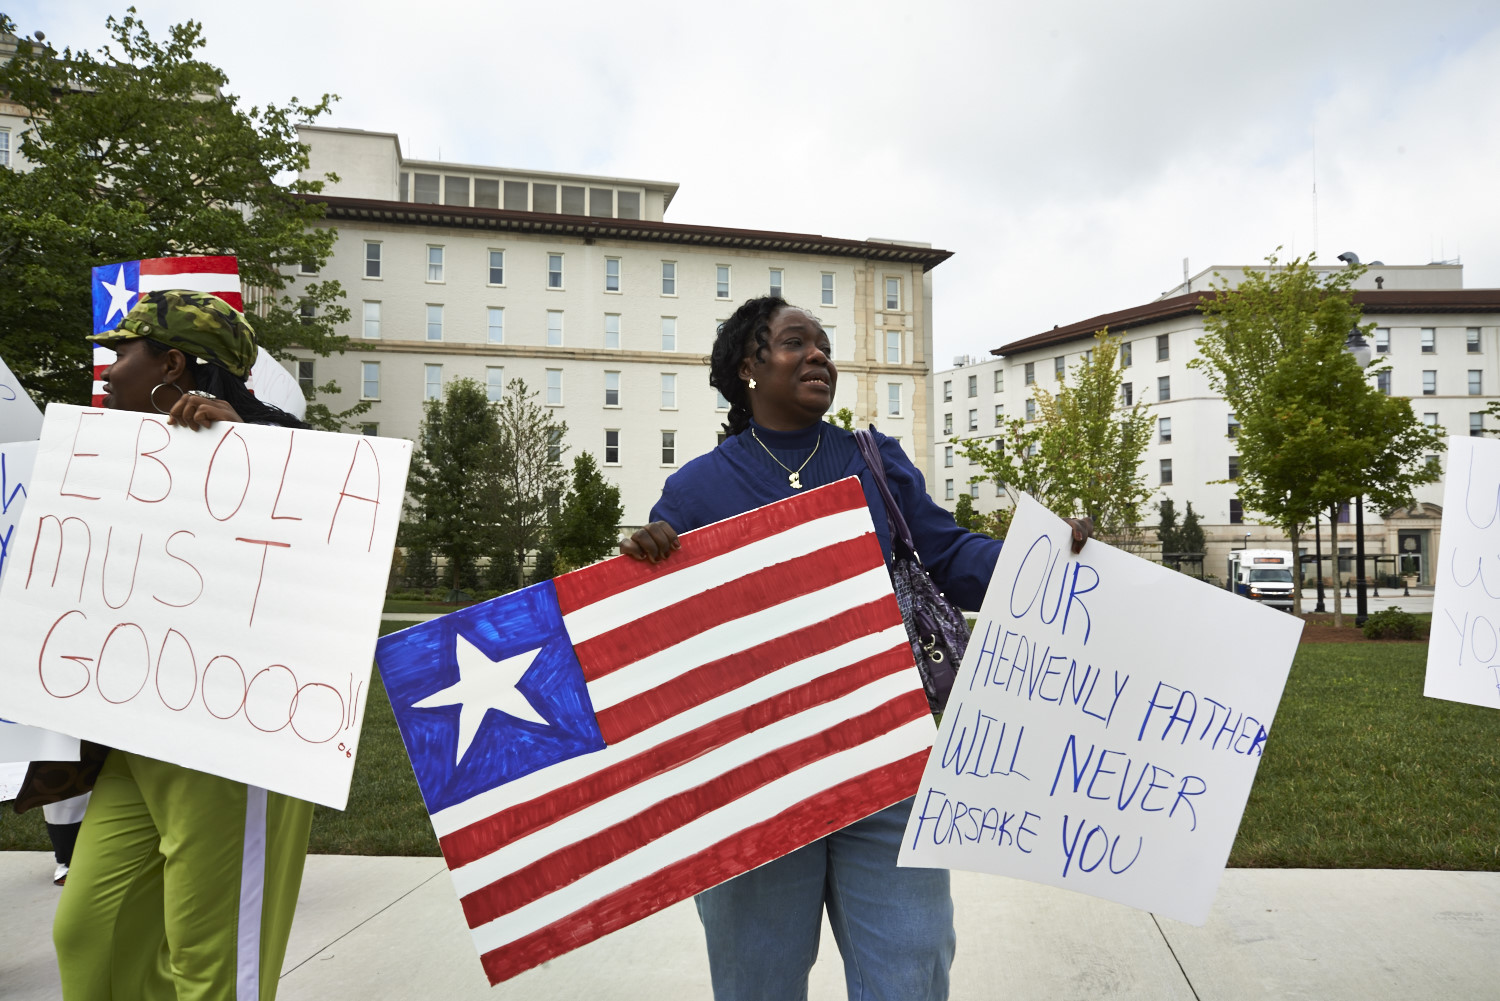 Garmai Kpardeh, a member of the Liberian Association of Metropolitan Atlanta rallying in front of Emory University Hospital, August 9. (Spencer Lowell for TIME)